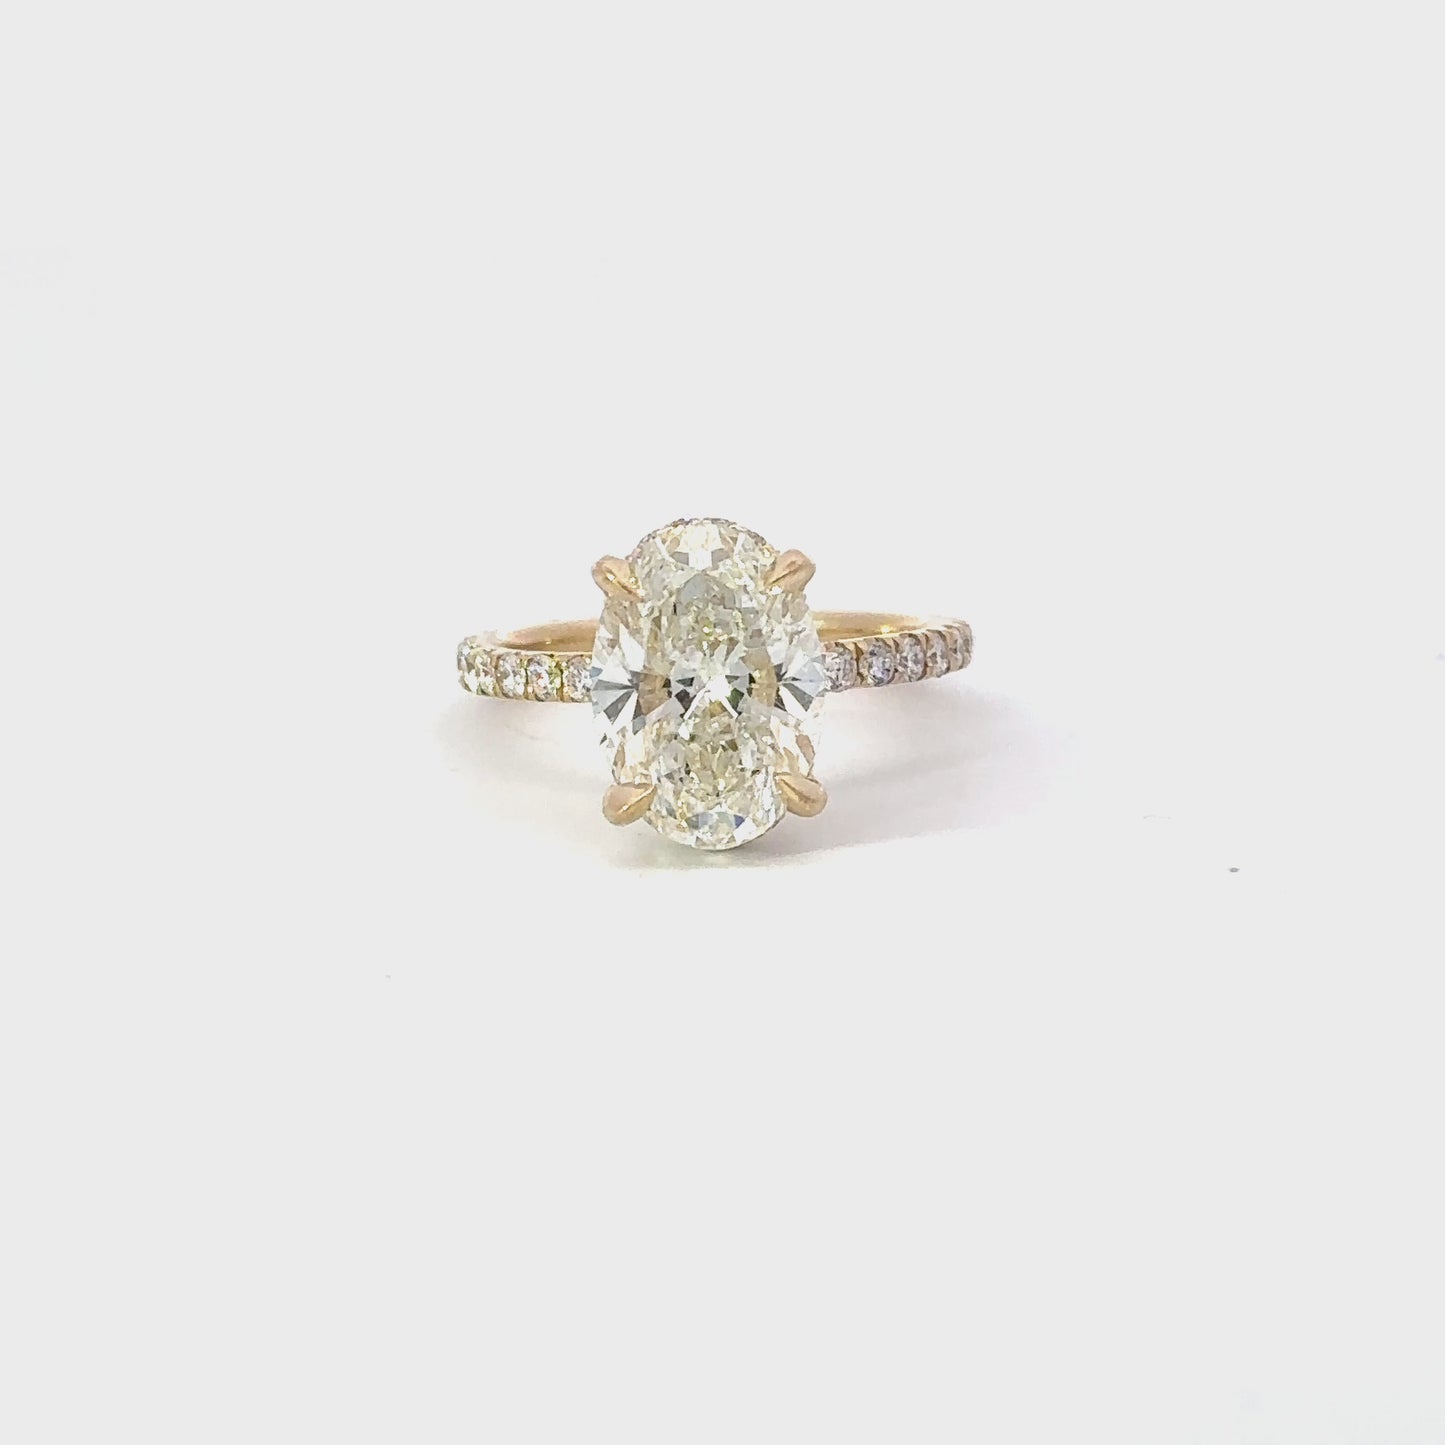 3.01 Carat Natural Oval Engagement Ring with Signature Setting